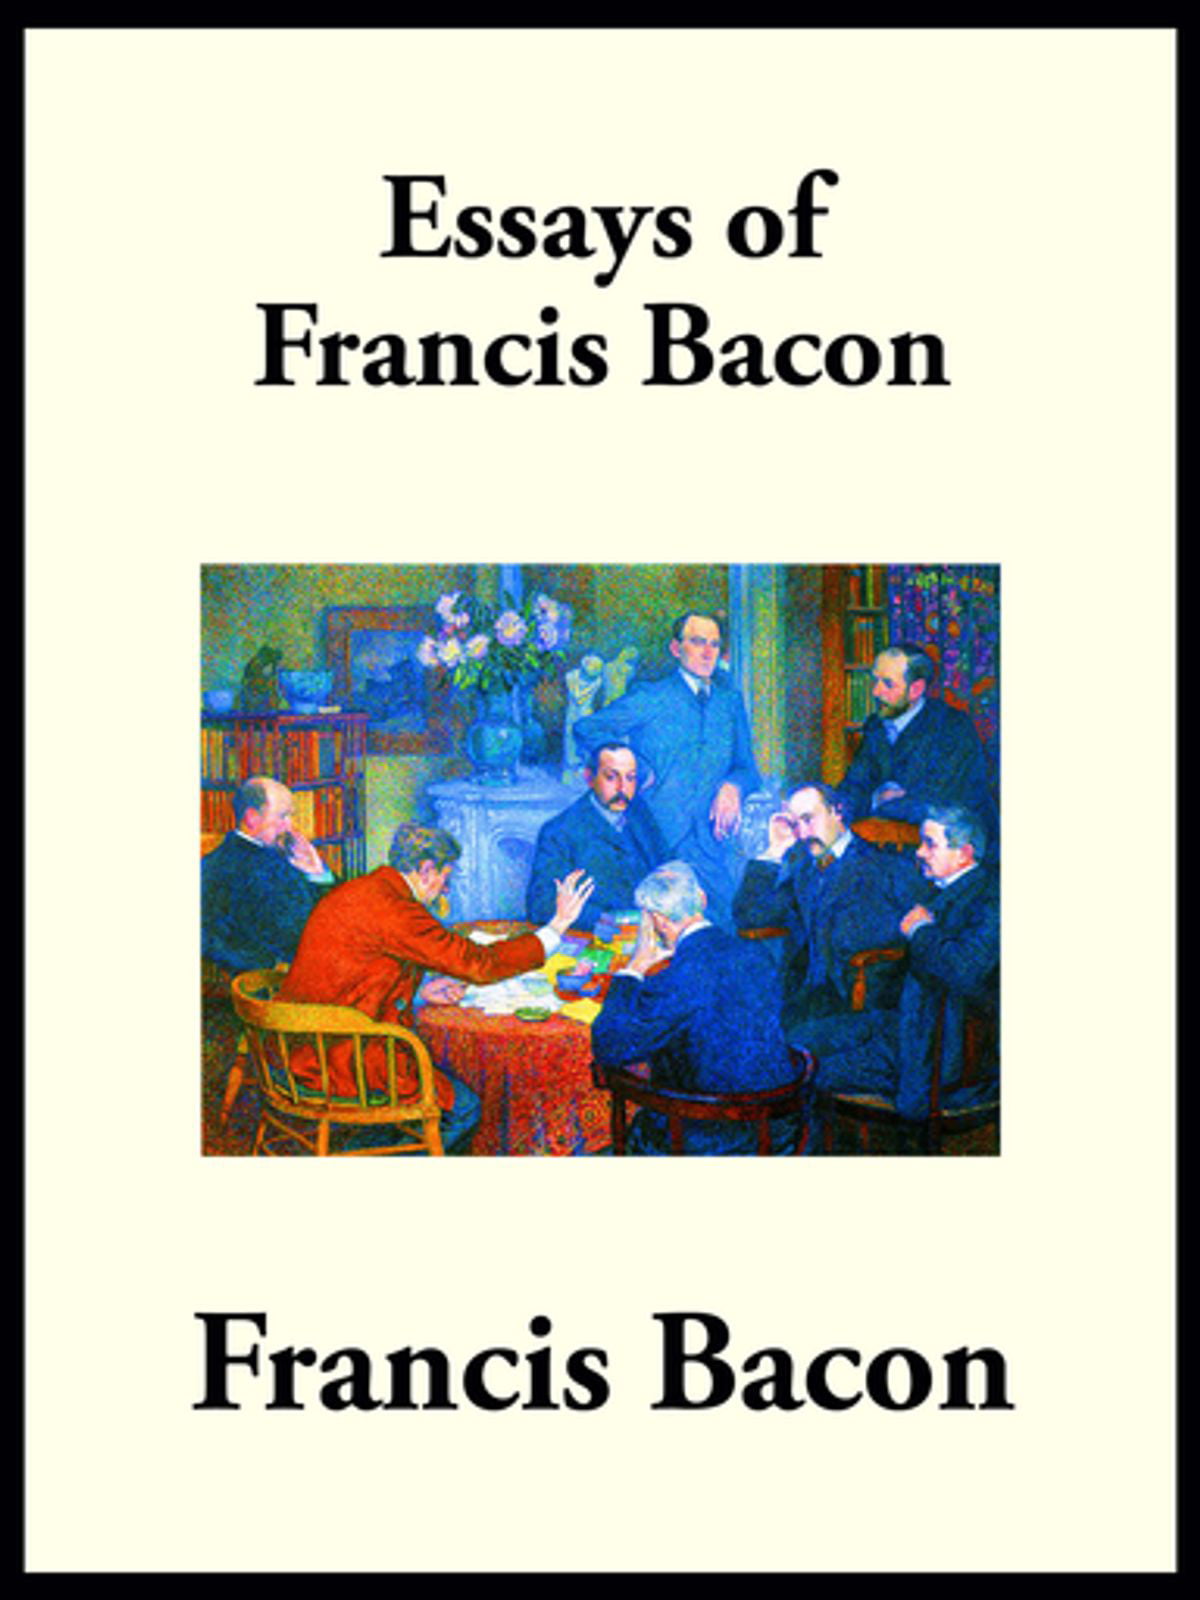 the essays by francis bacon